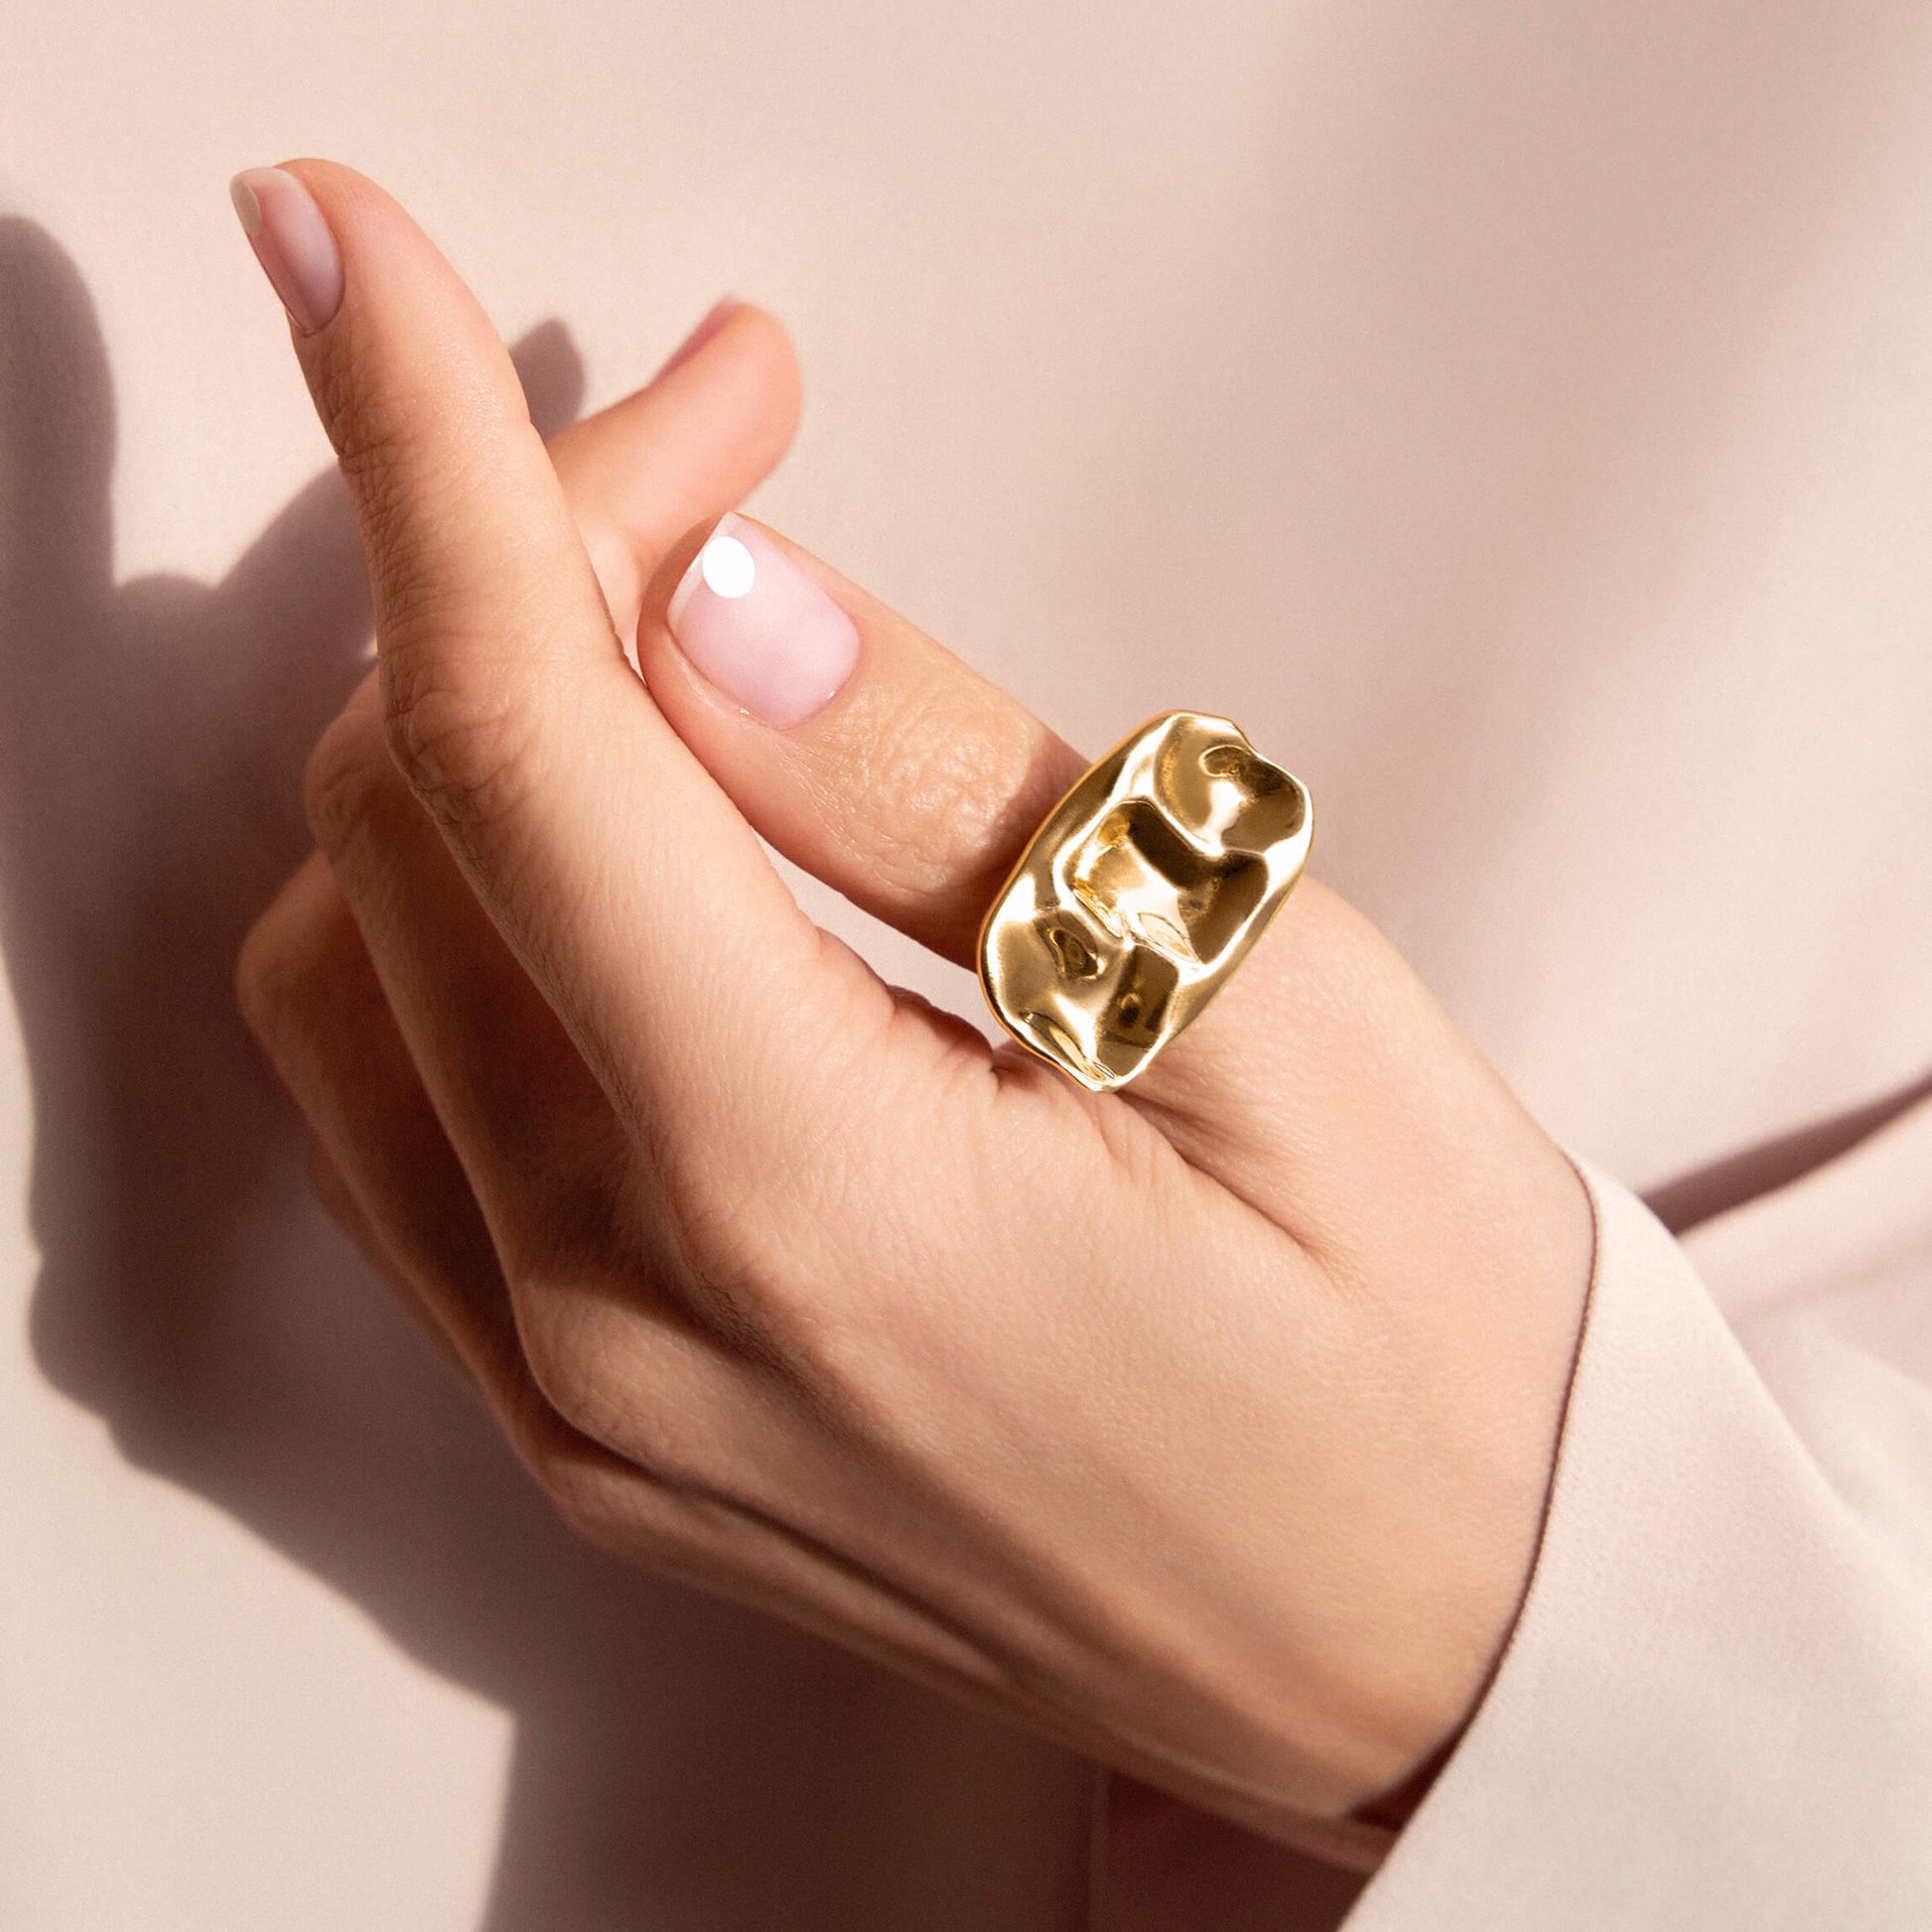 The Artist Palette Ring (M) is a Palette Ring -Brass -Makeup- made by Doublemoss Arte